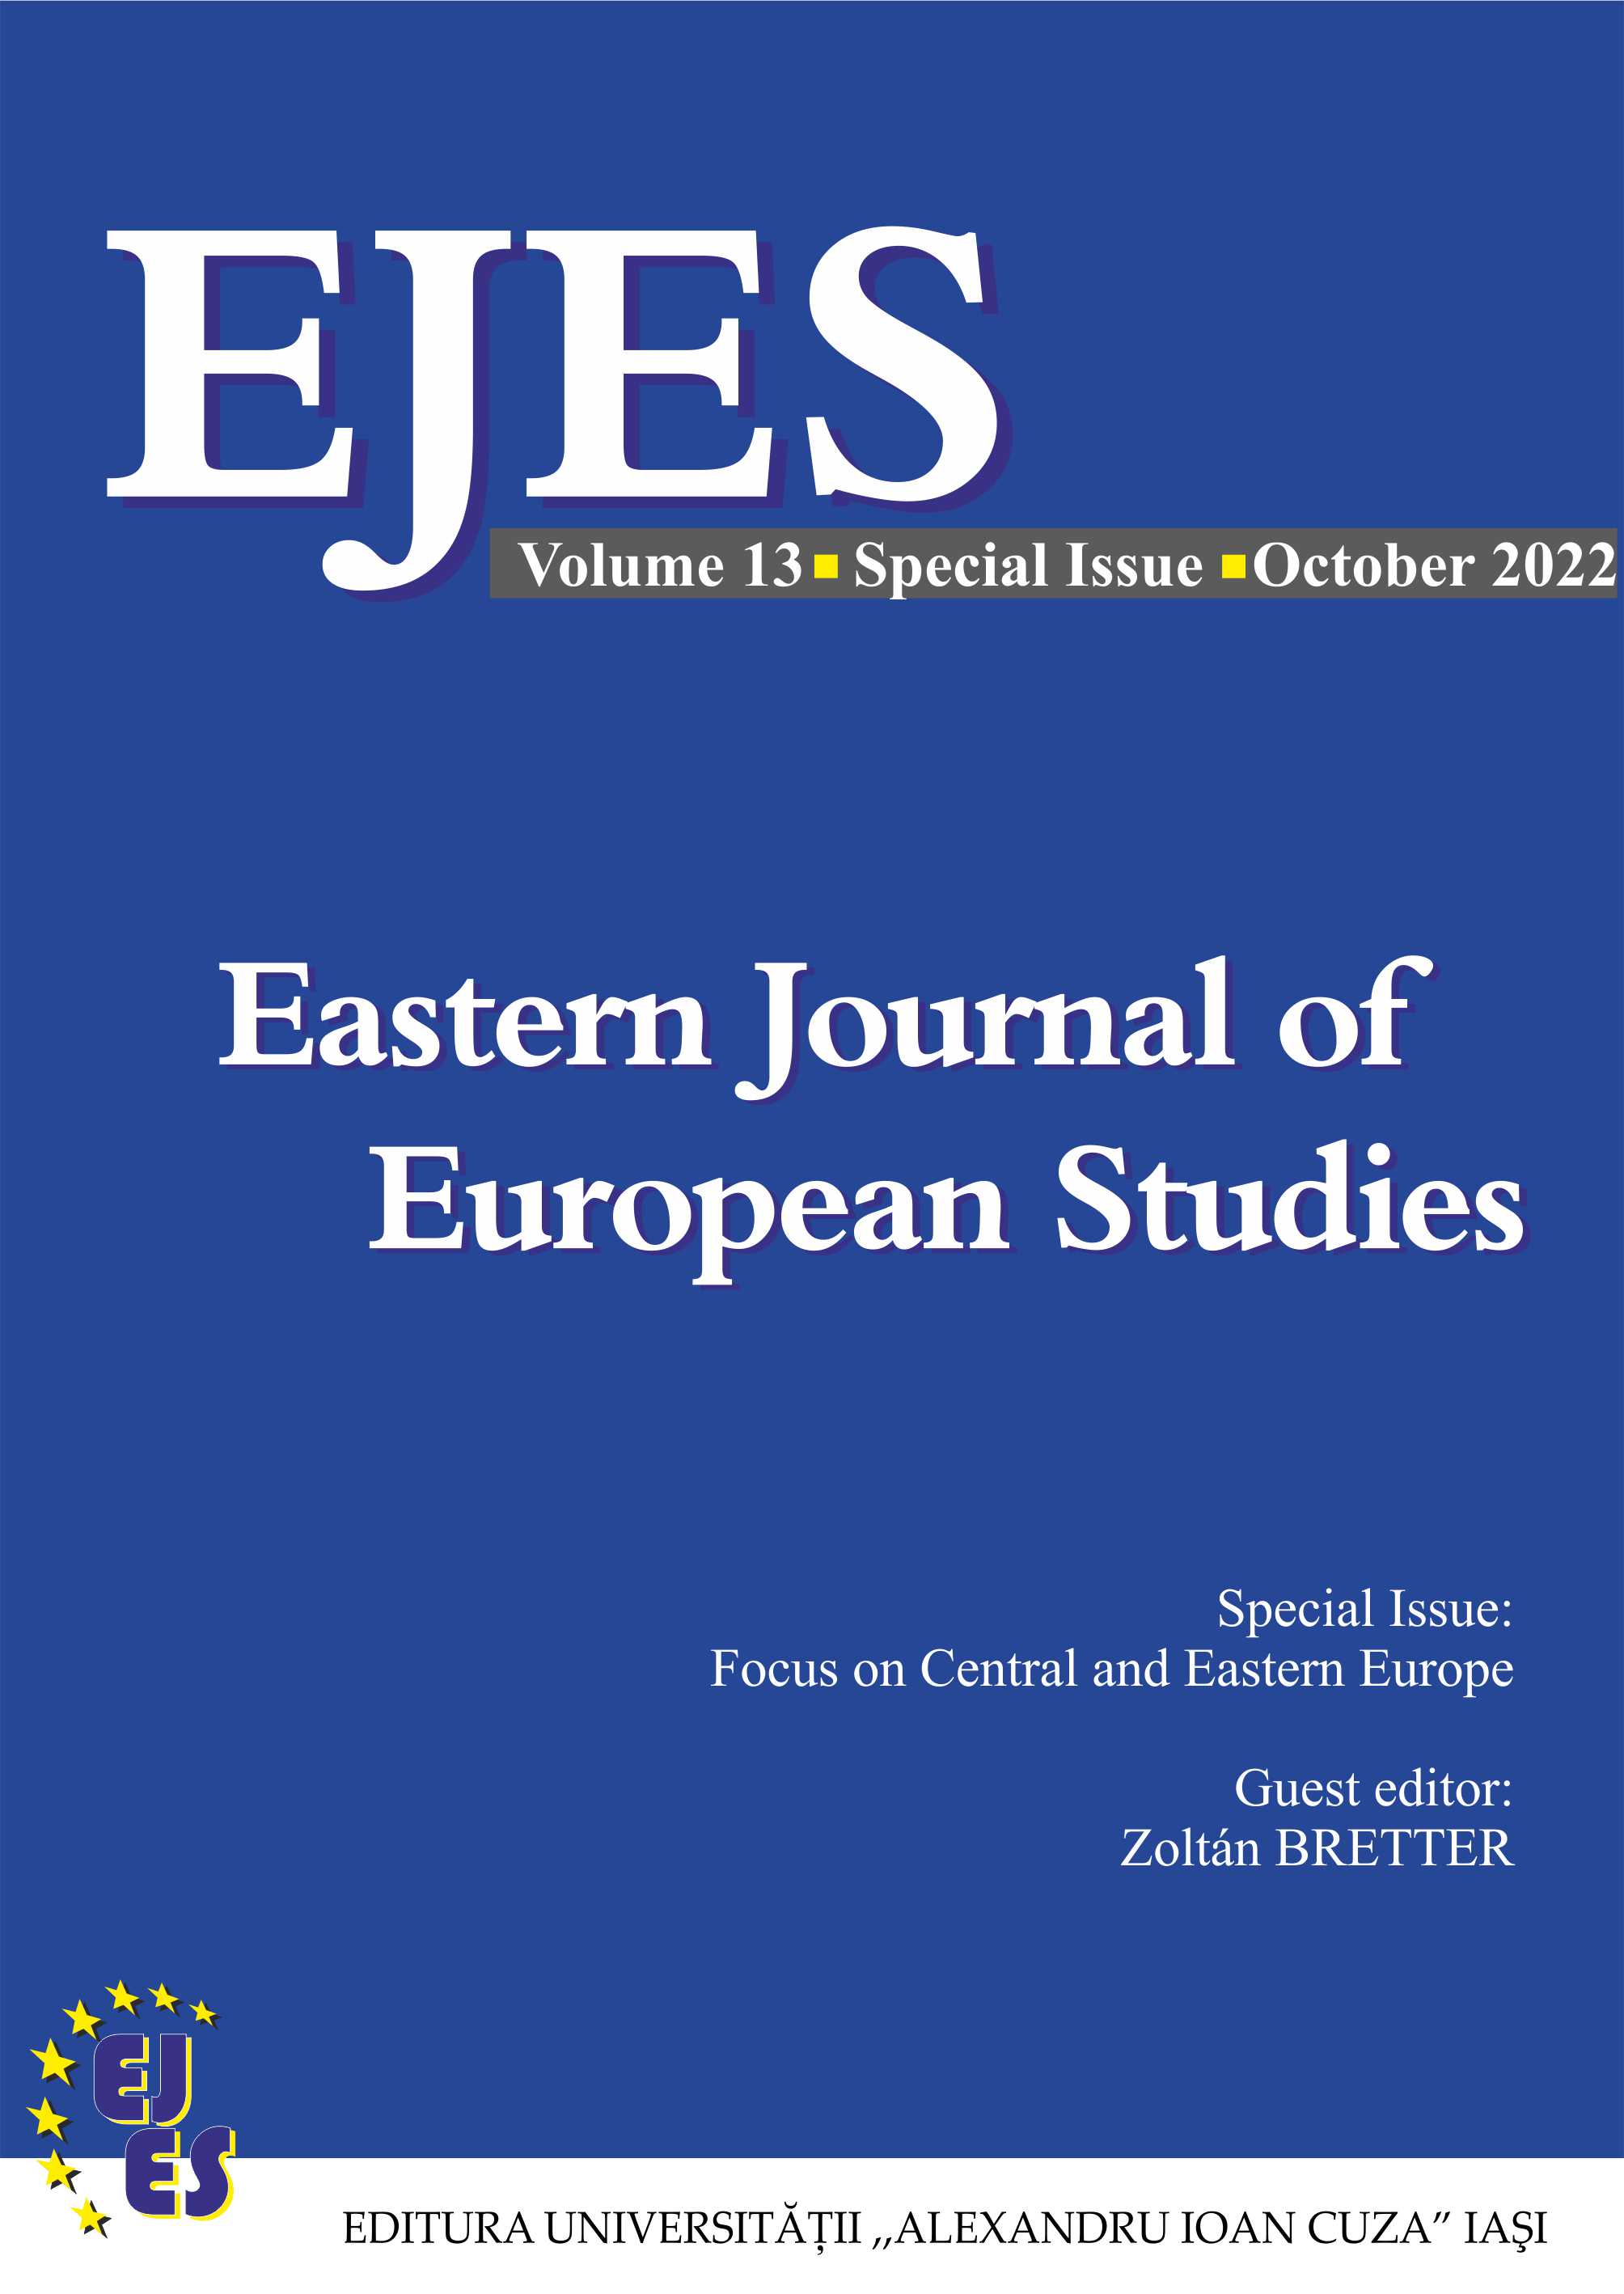 Hybrid foreign policies in the EU’s Eastern flank: adaptive diplomacy